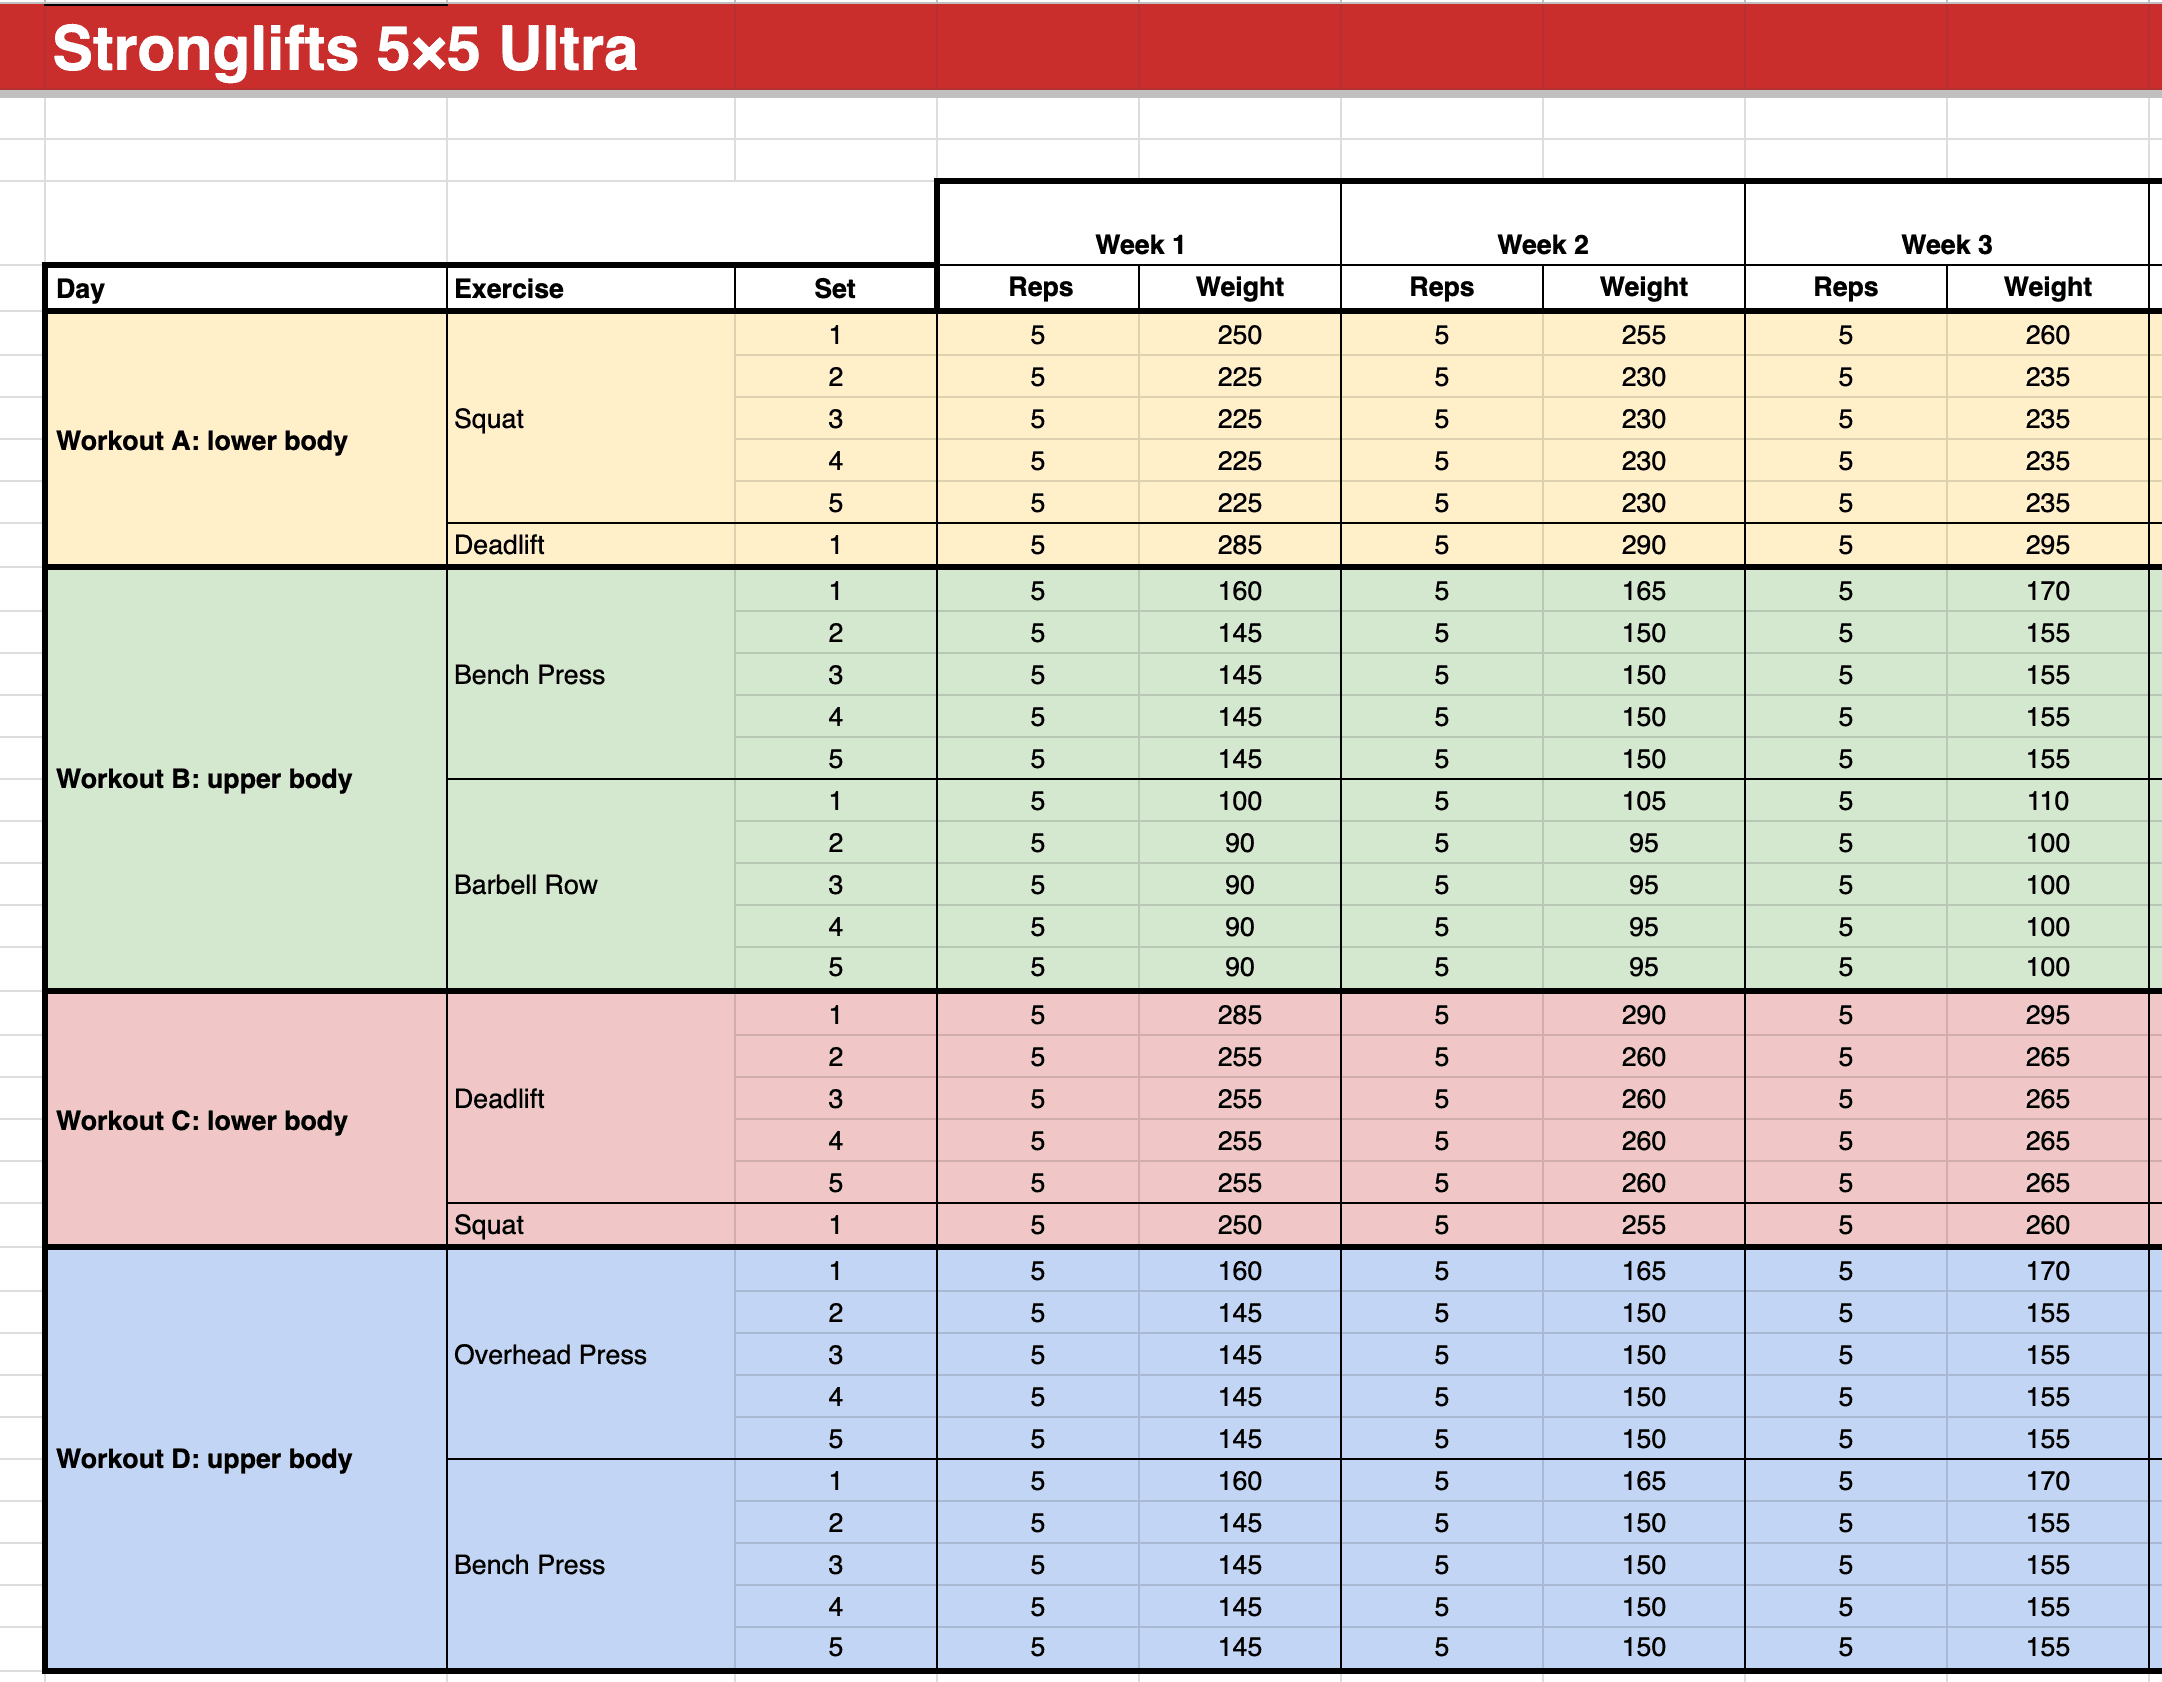 Enter your best lifts in the Stronglifts 5x5 Ultra spreadsheet